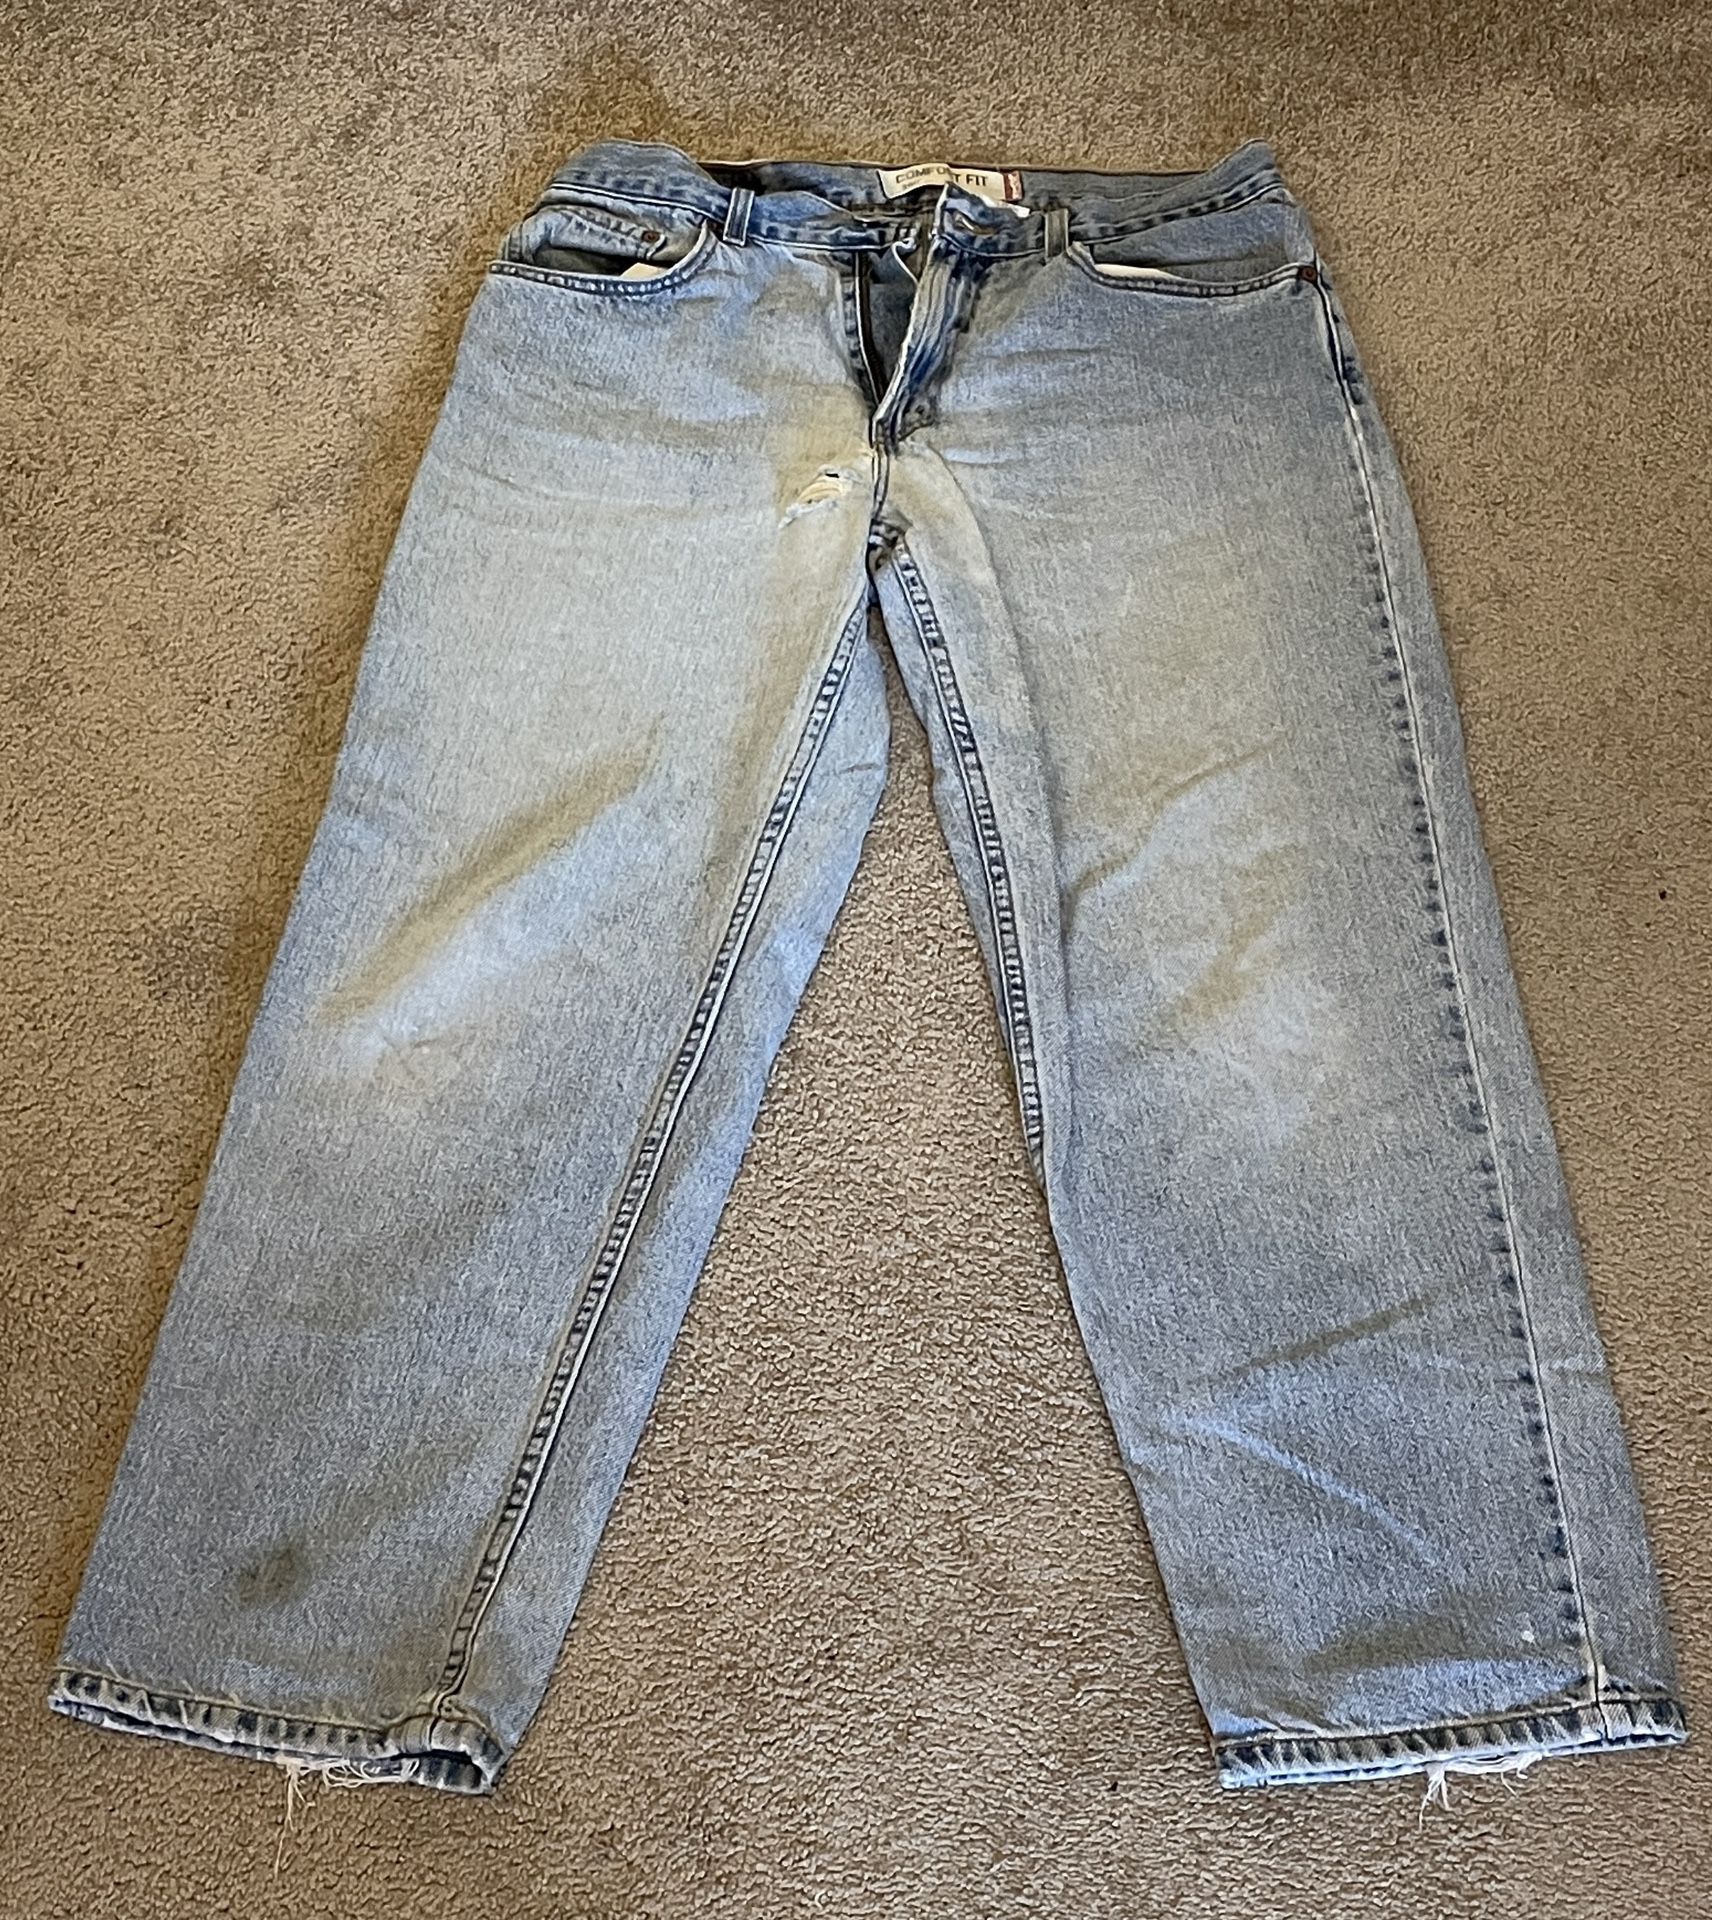 Levi's Comfort Fit 560 Light Wash Blue Non-Stretch Denim Jeans Men's Size  33 x 32 for Sale in Swansea, MA - OfferUp